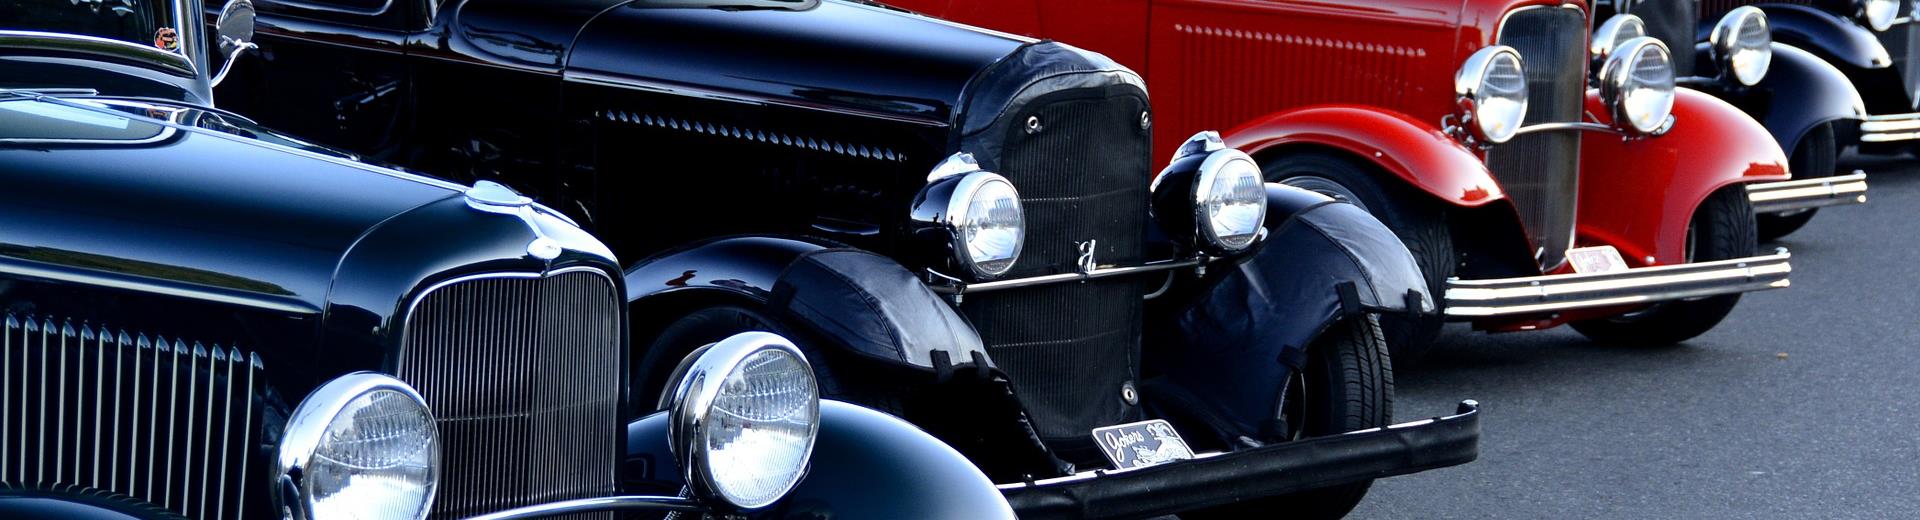 The fair of classic cars and motorcycles in Turin: book your room at Best Western Hotel Luxor 4 star